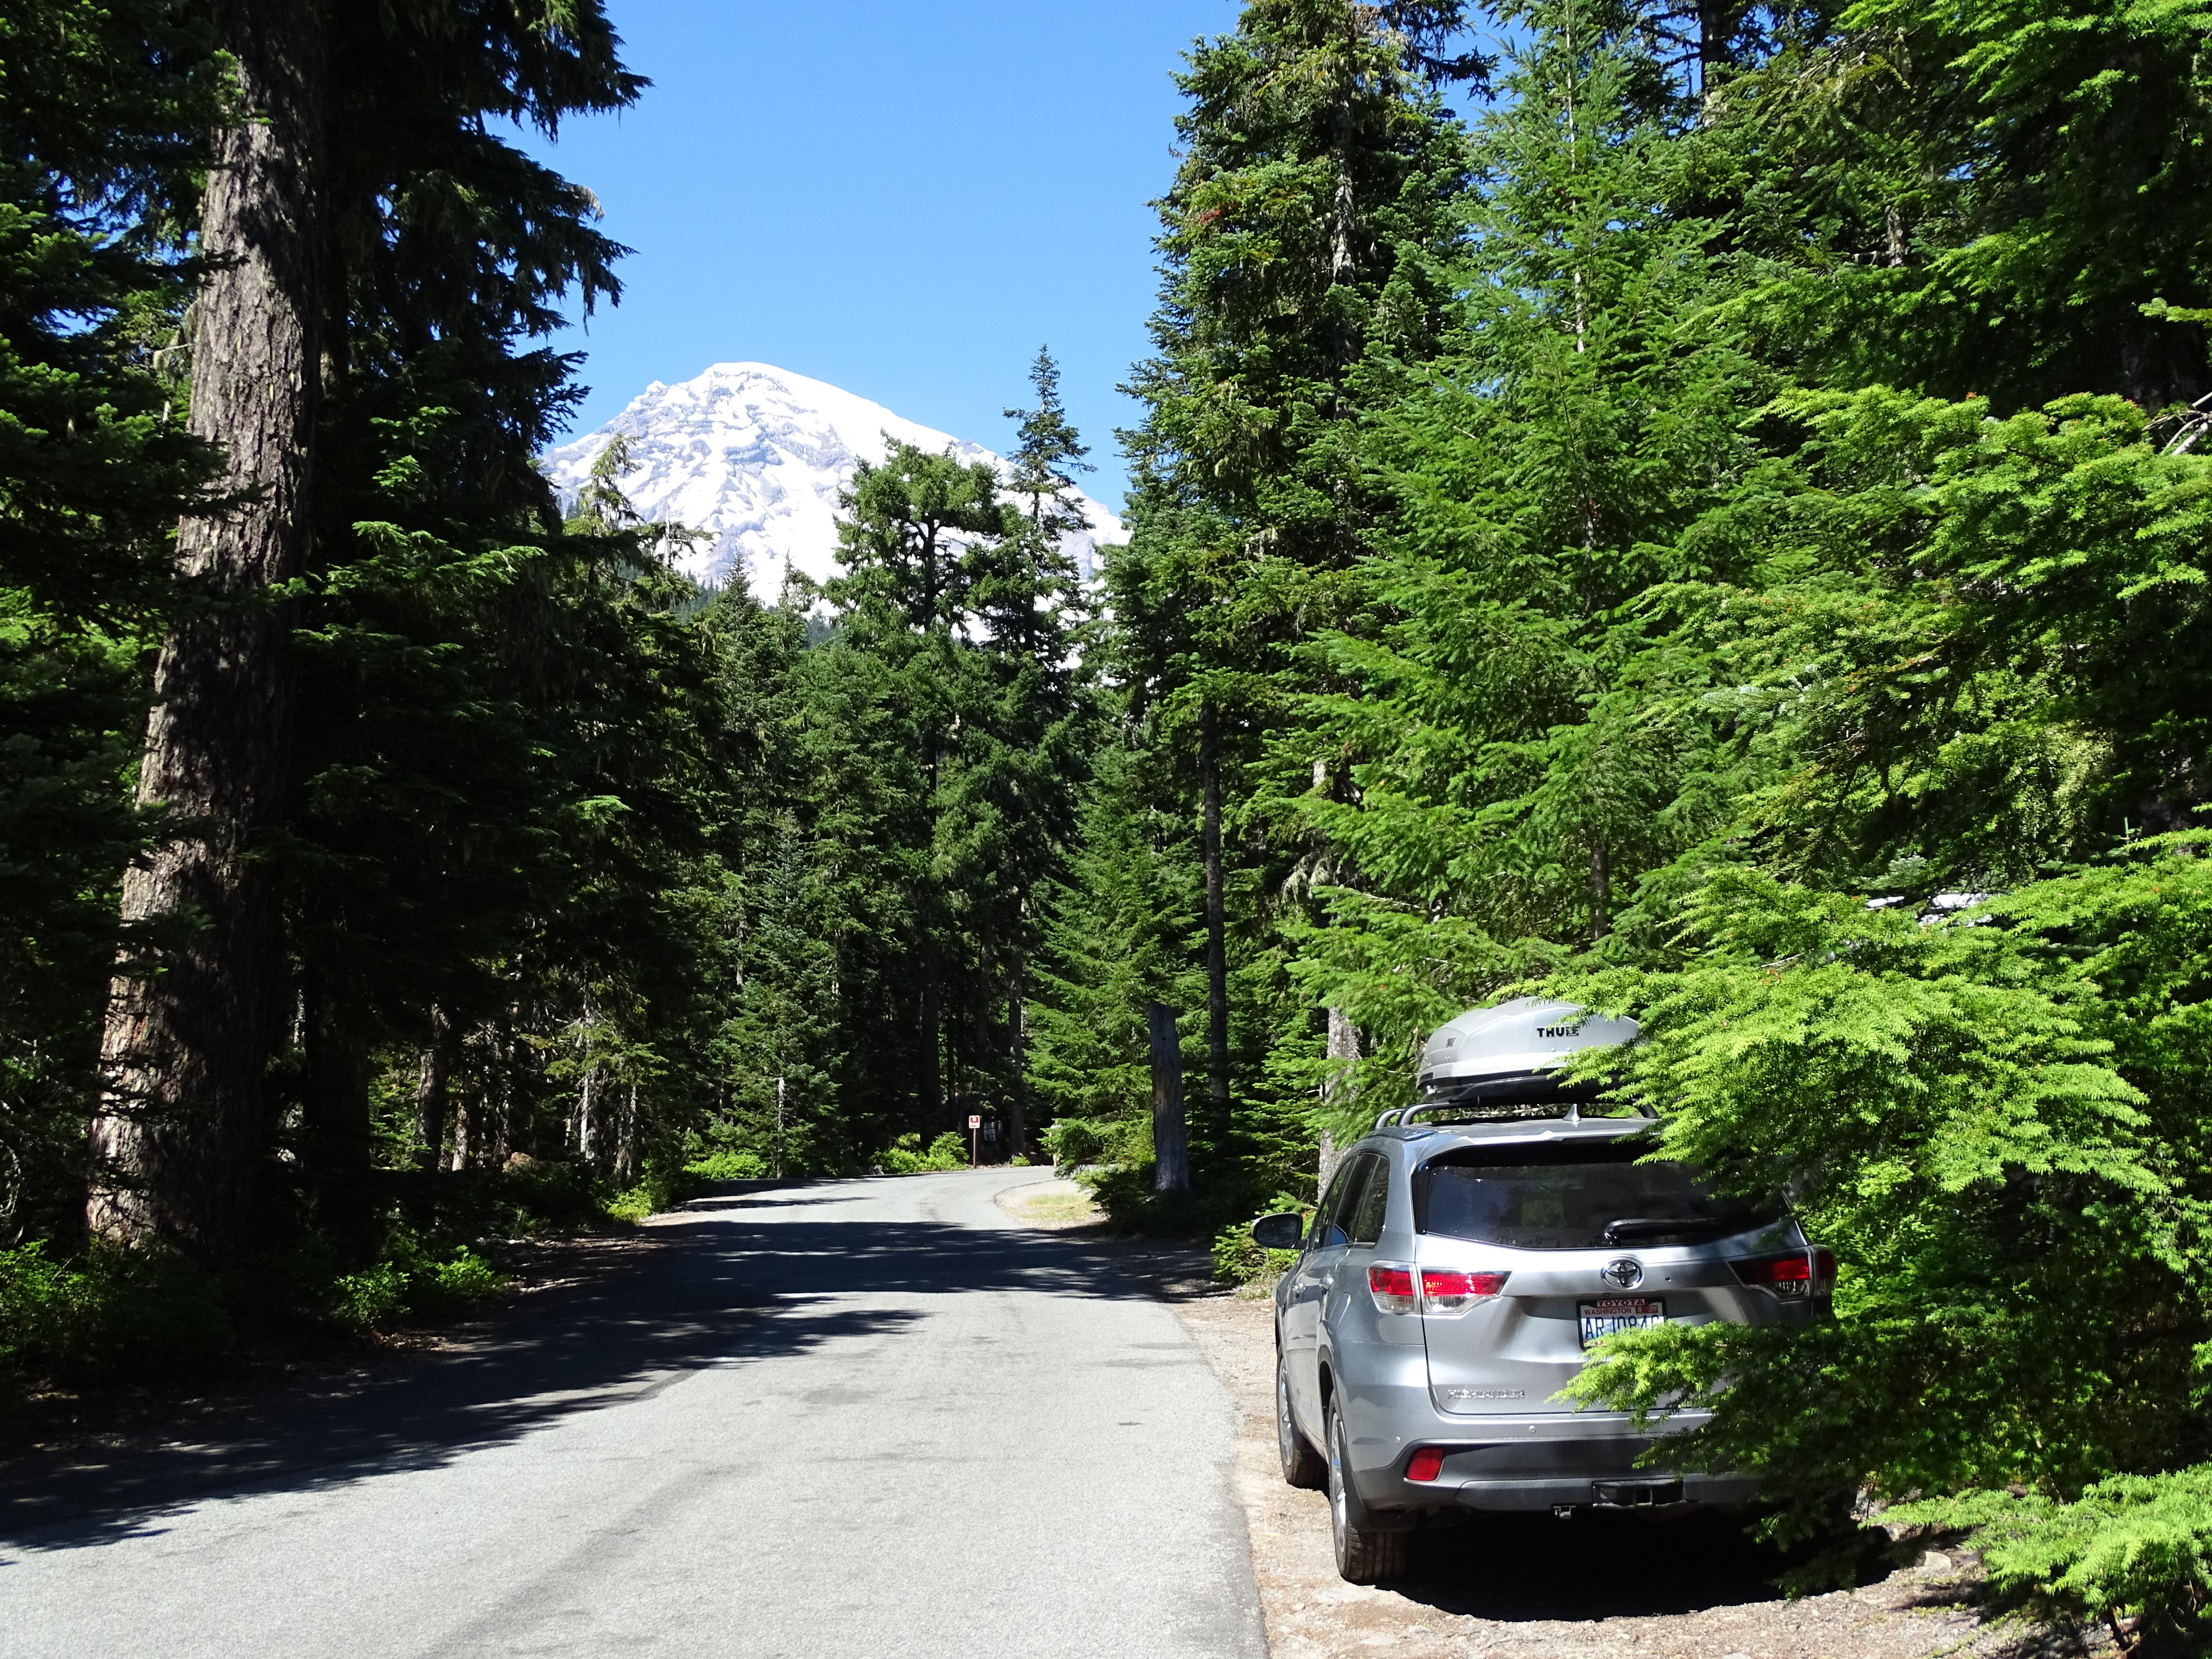 A forest road with the top of Mount Rainier poking out over the trees.